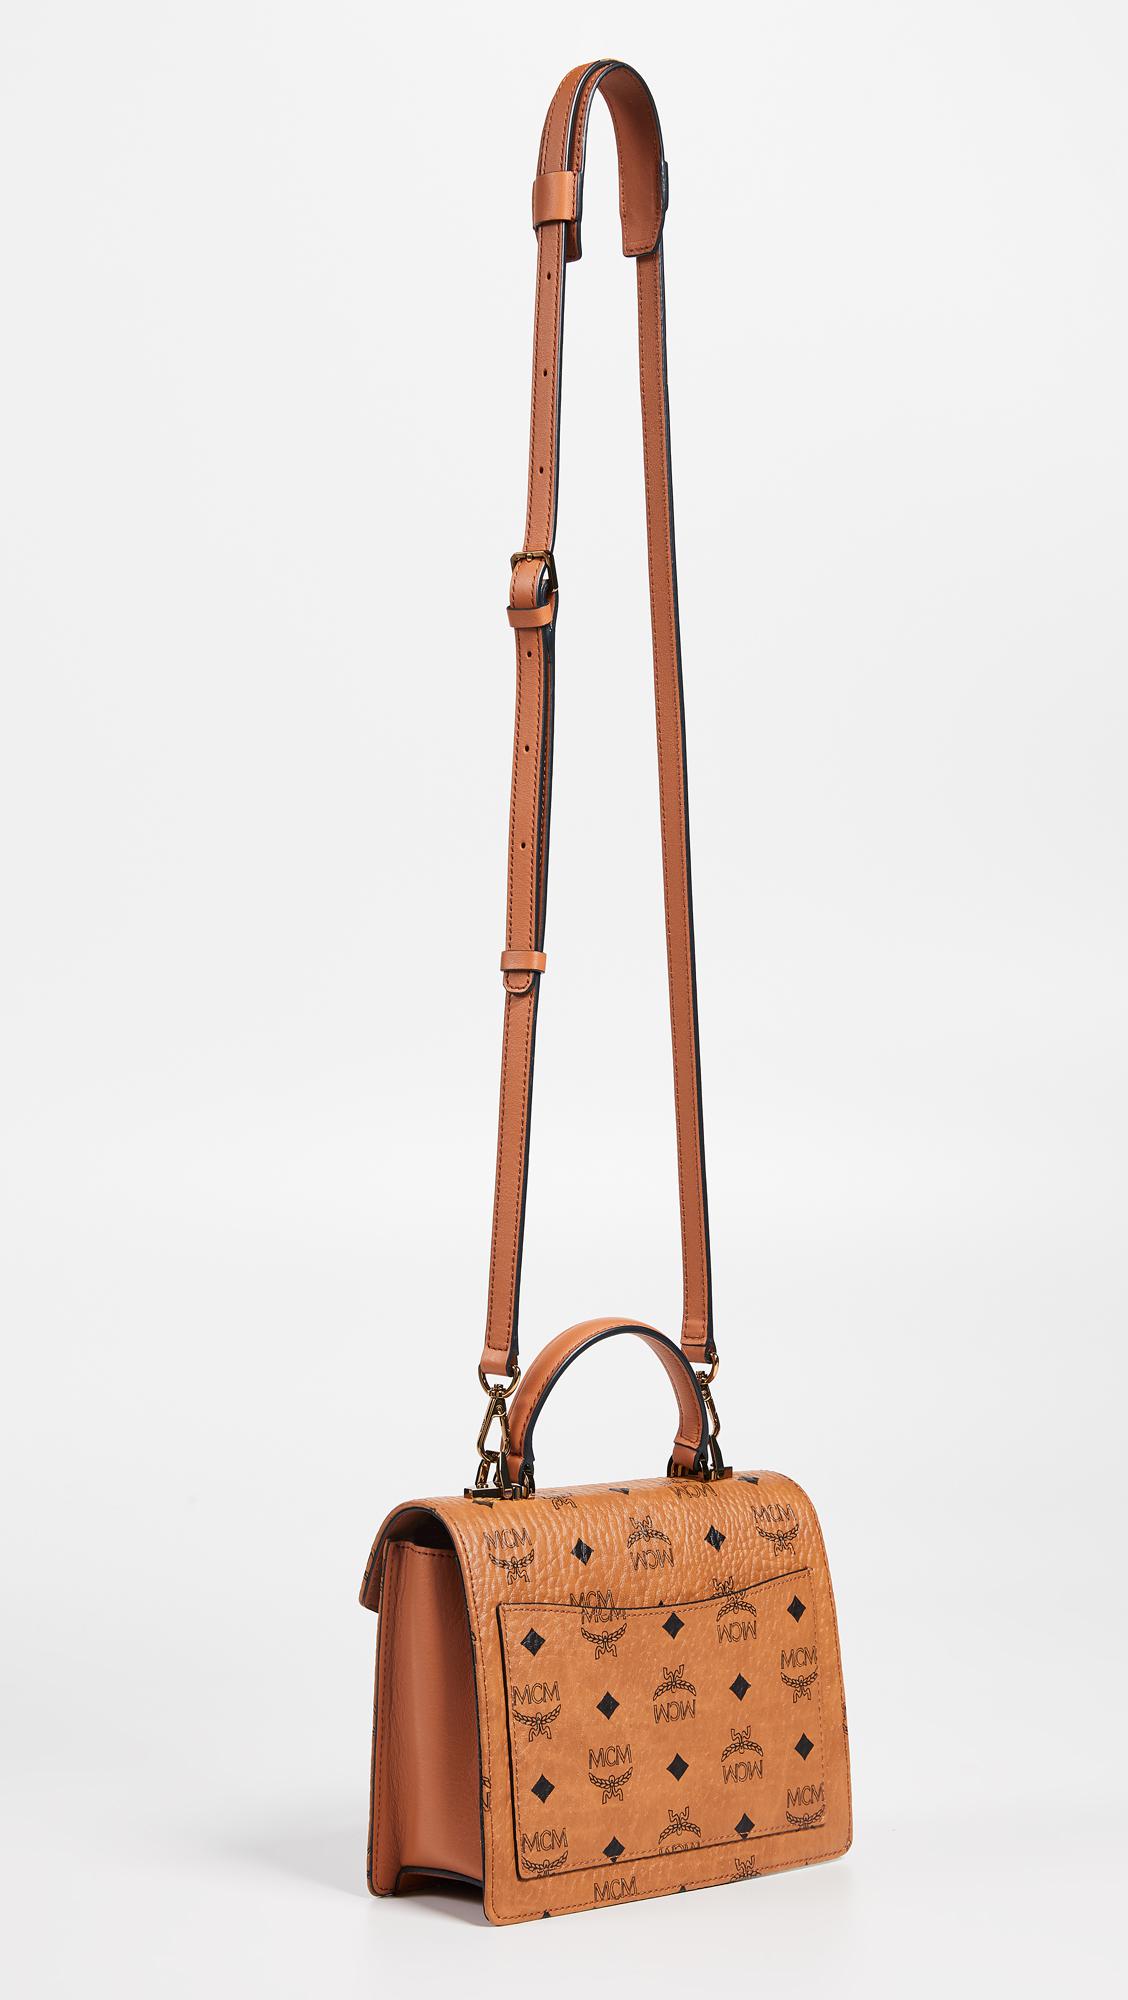 MCM - Looking for a bag that is both practical & stylish? Meet the #MCM  Patricia shoulder bag in Embellished Visetos